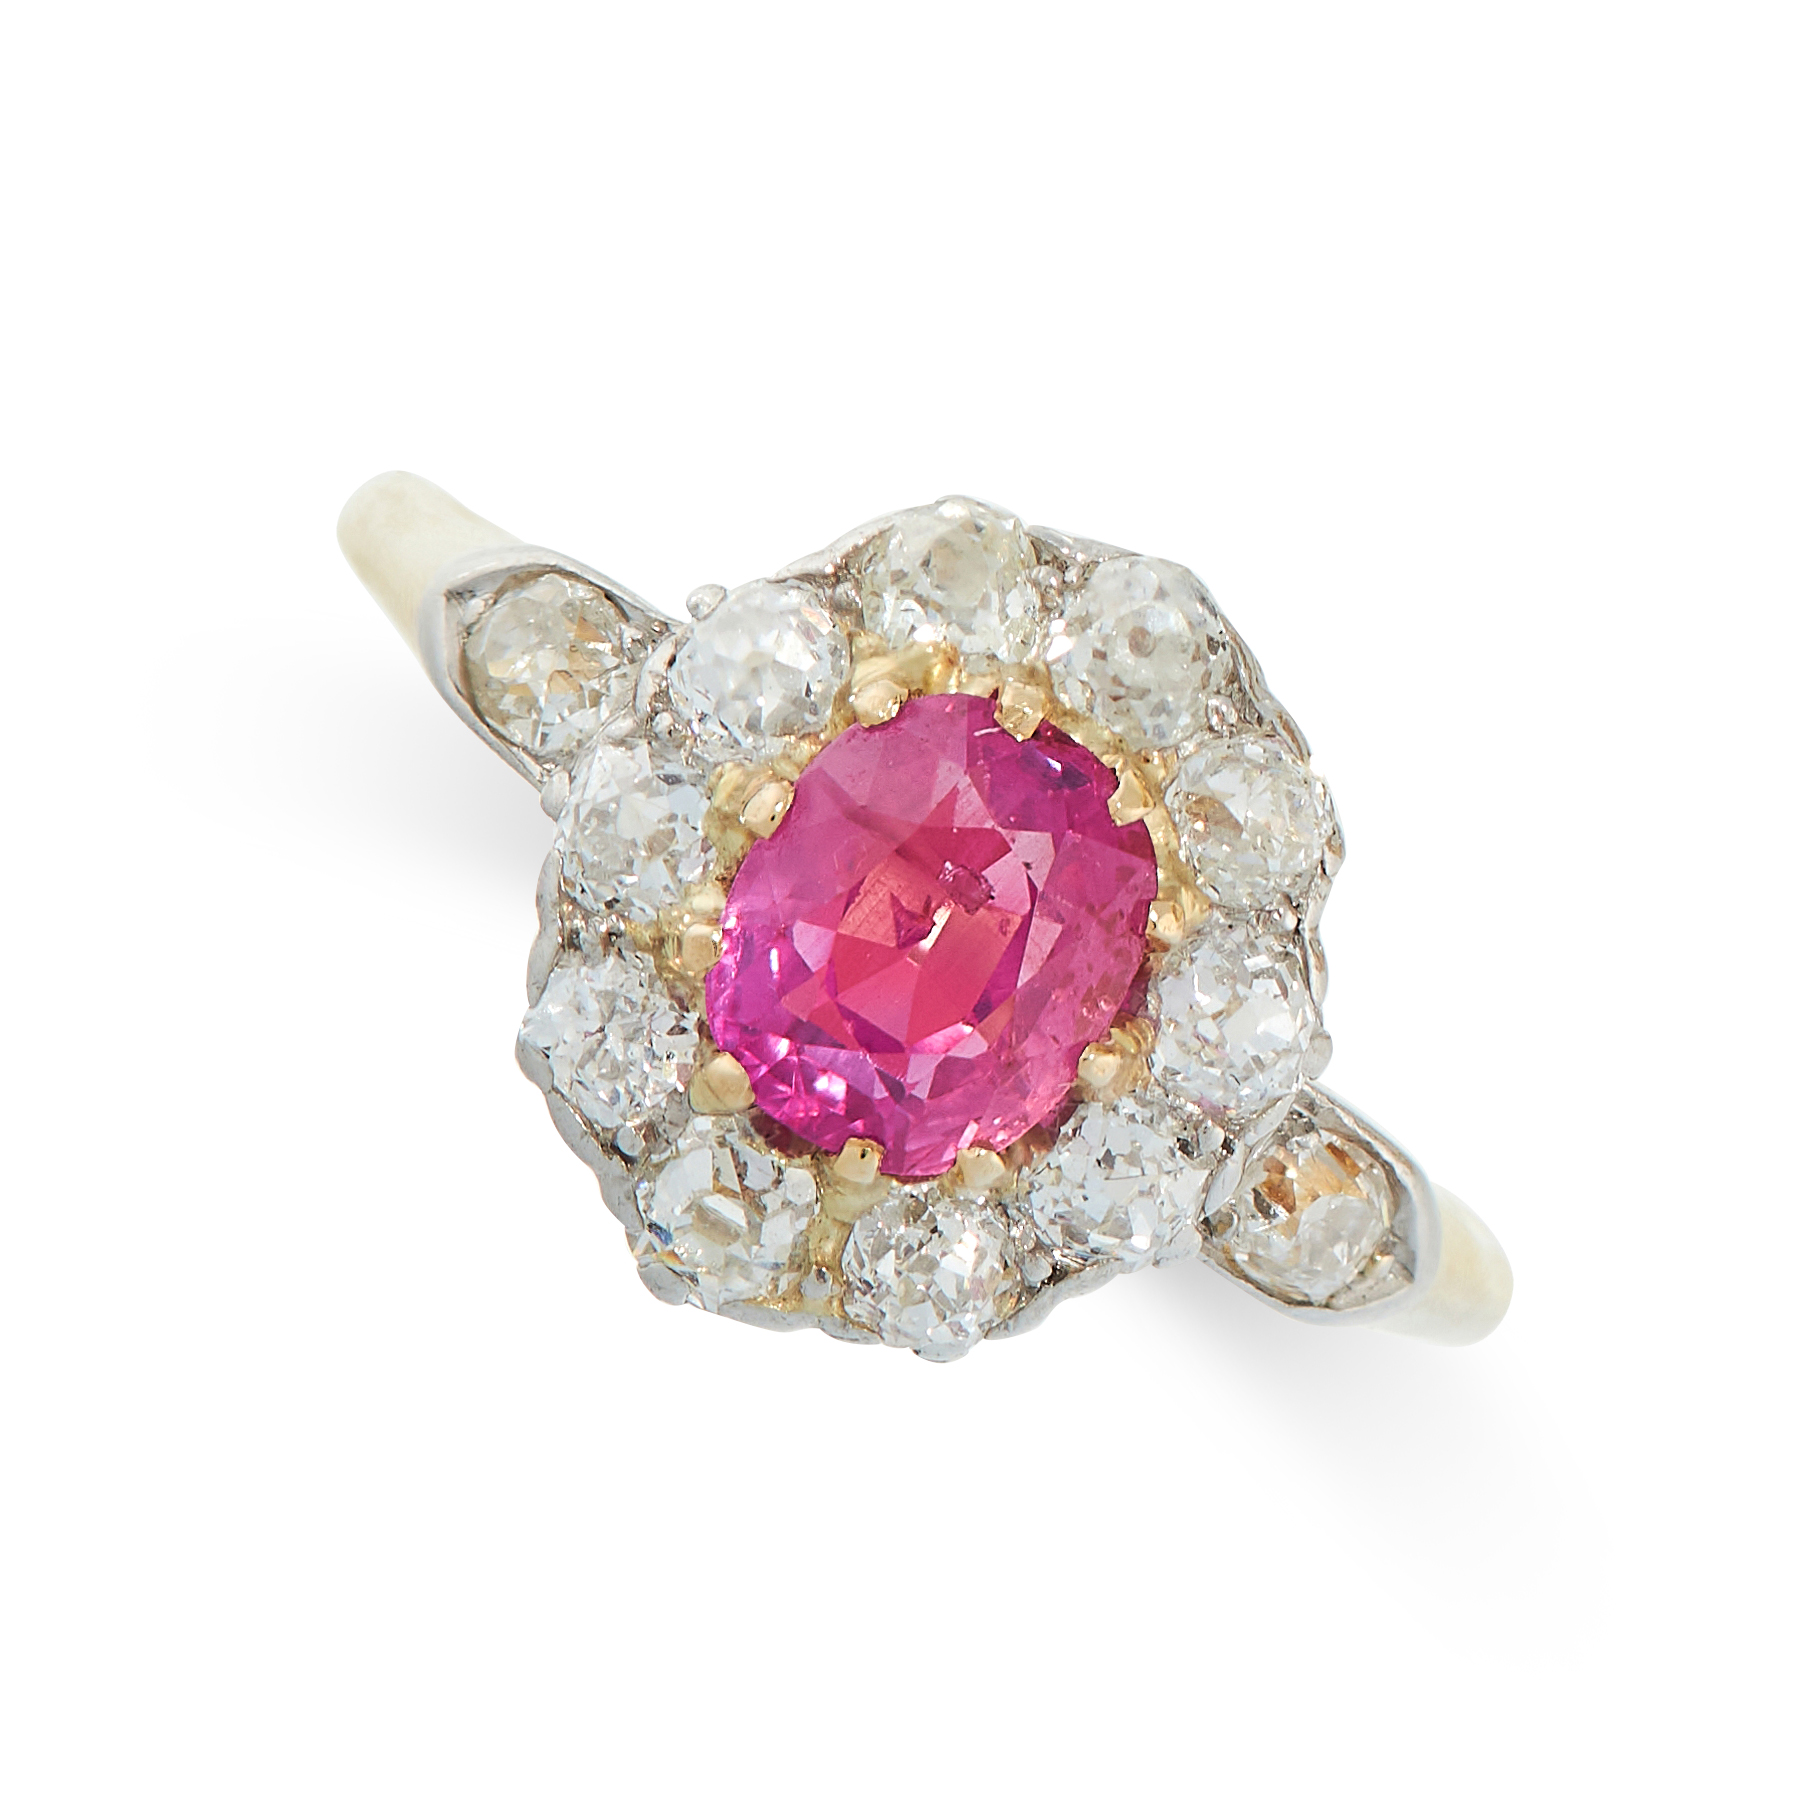 BURMA NO HEAT RUBY AND DIAMOND RING in cluster form, set with a cushion cut ruby of 1.14 carats in a